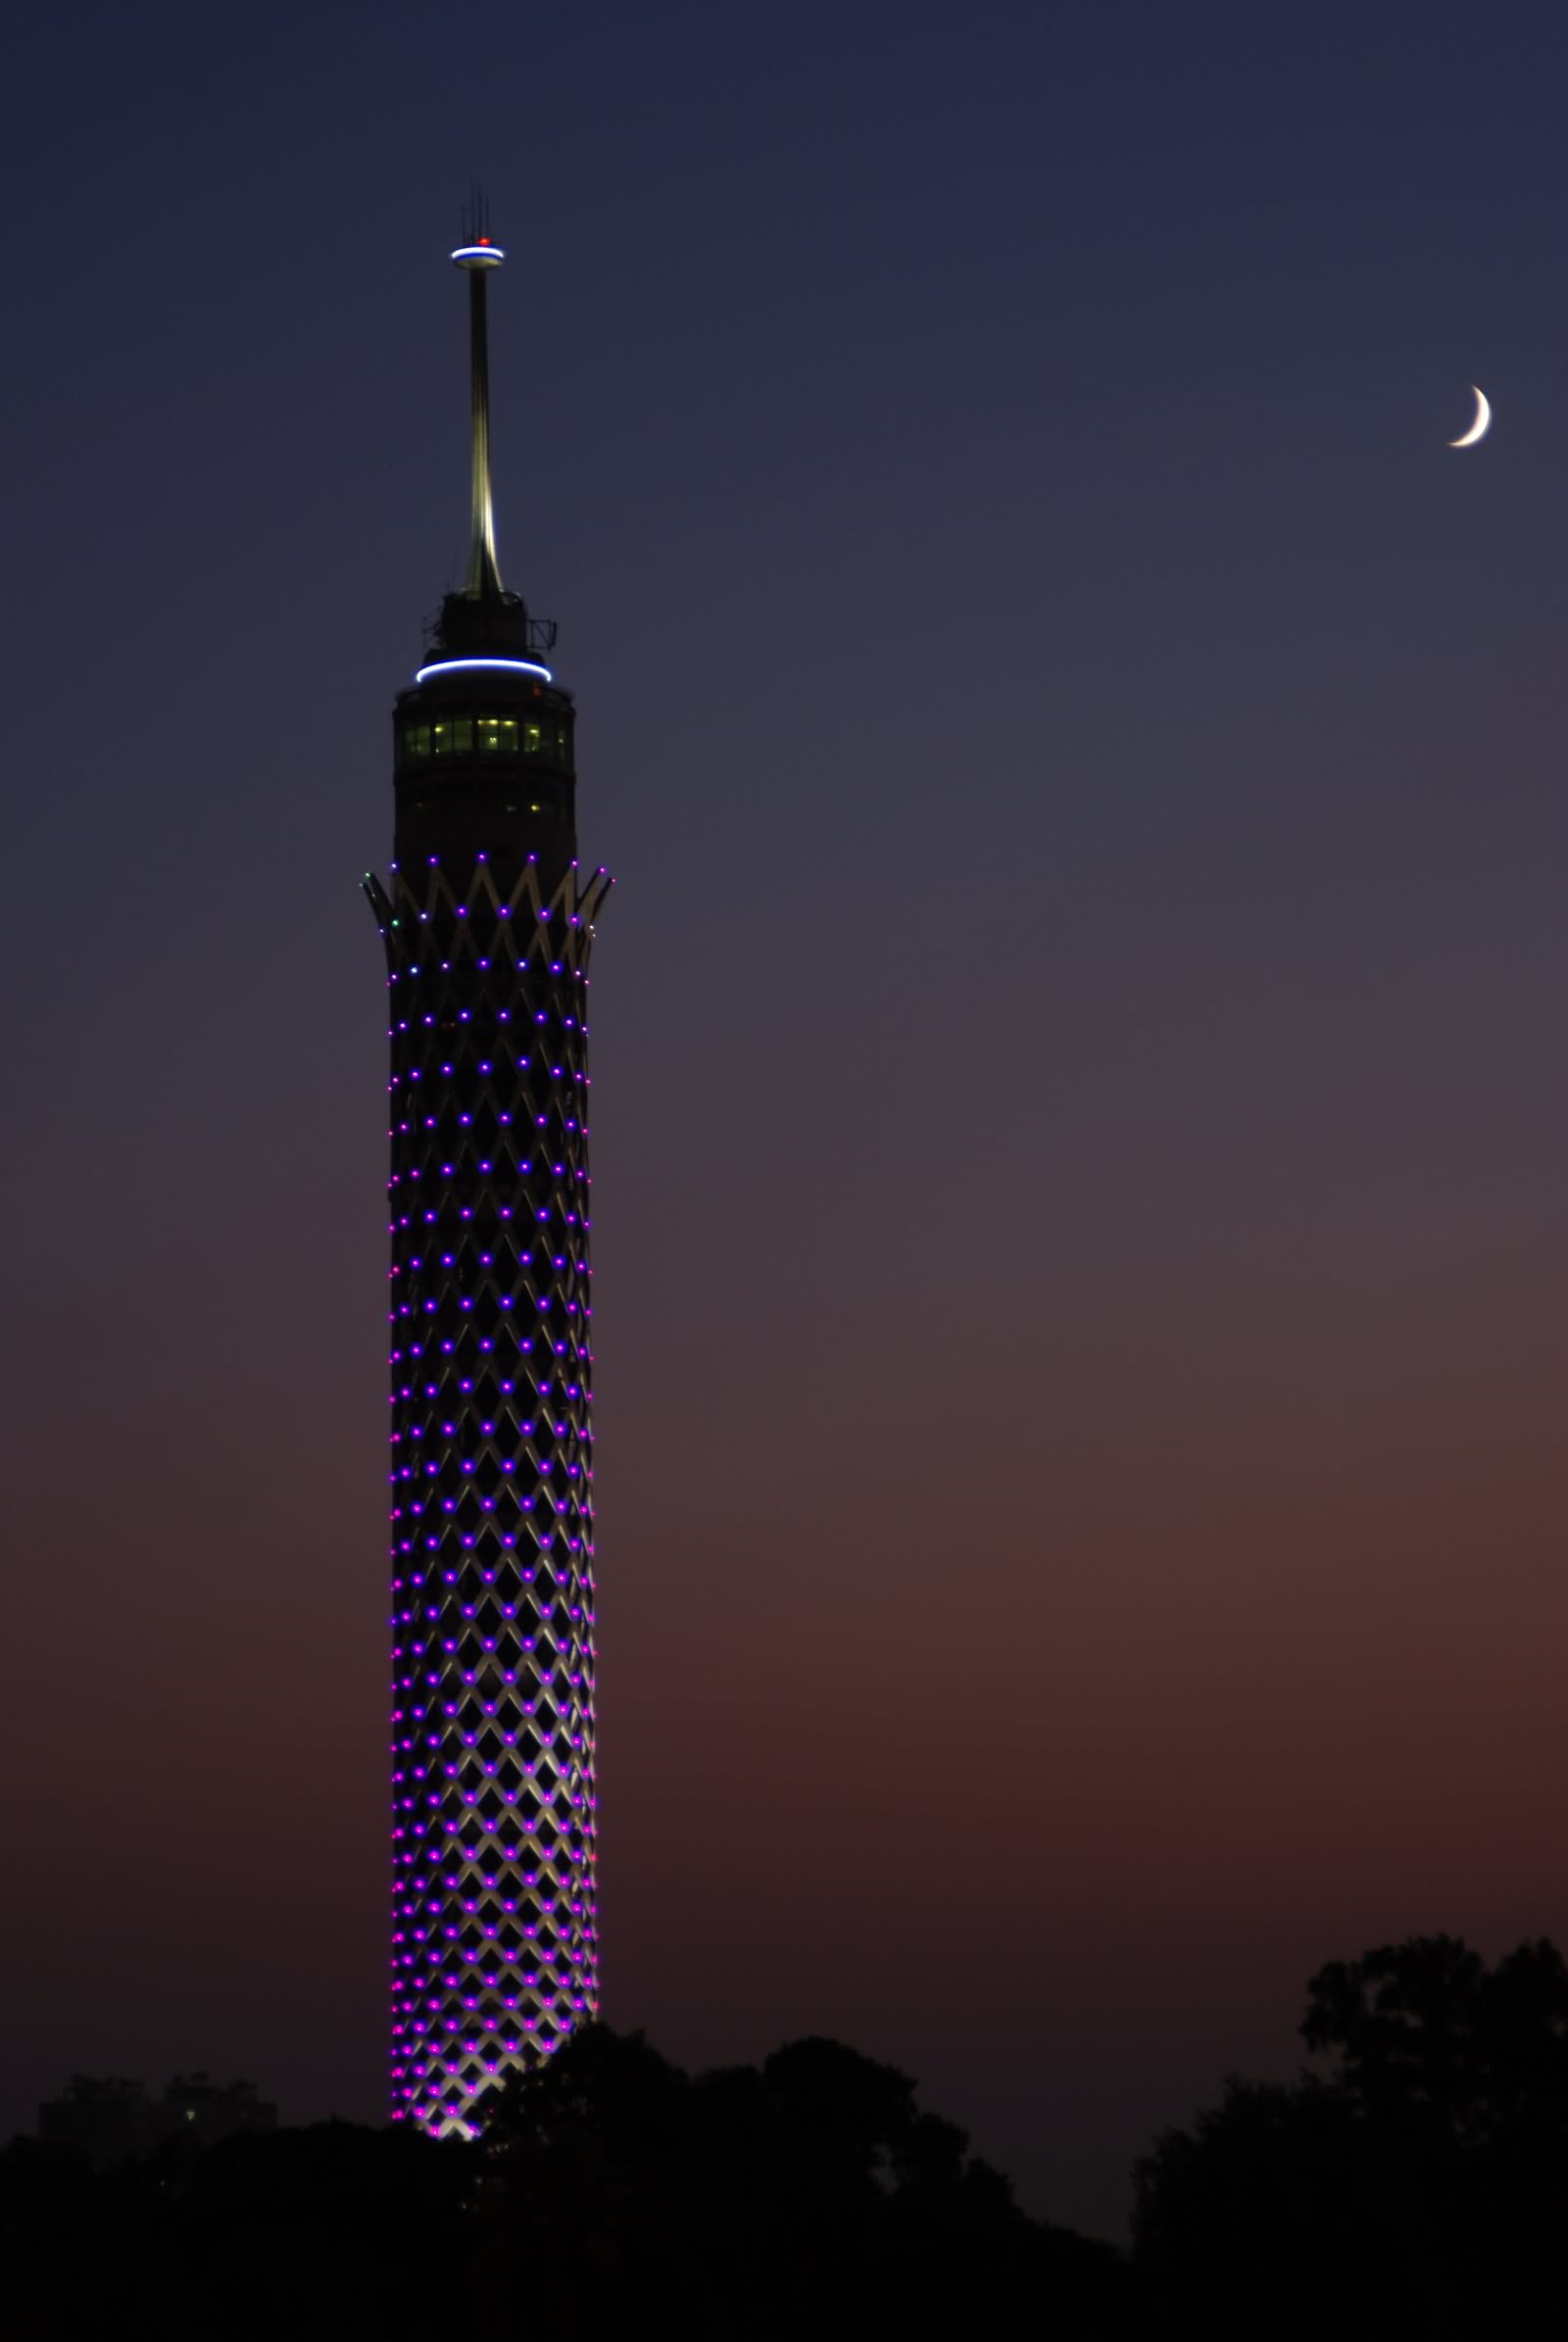 32 Incredible Night View Images And Pictures Of Cairo Tower, Egypt